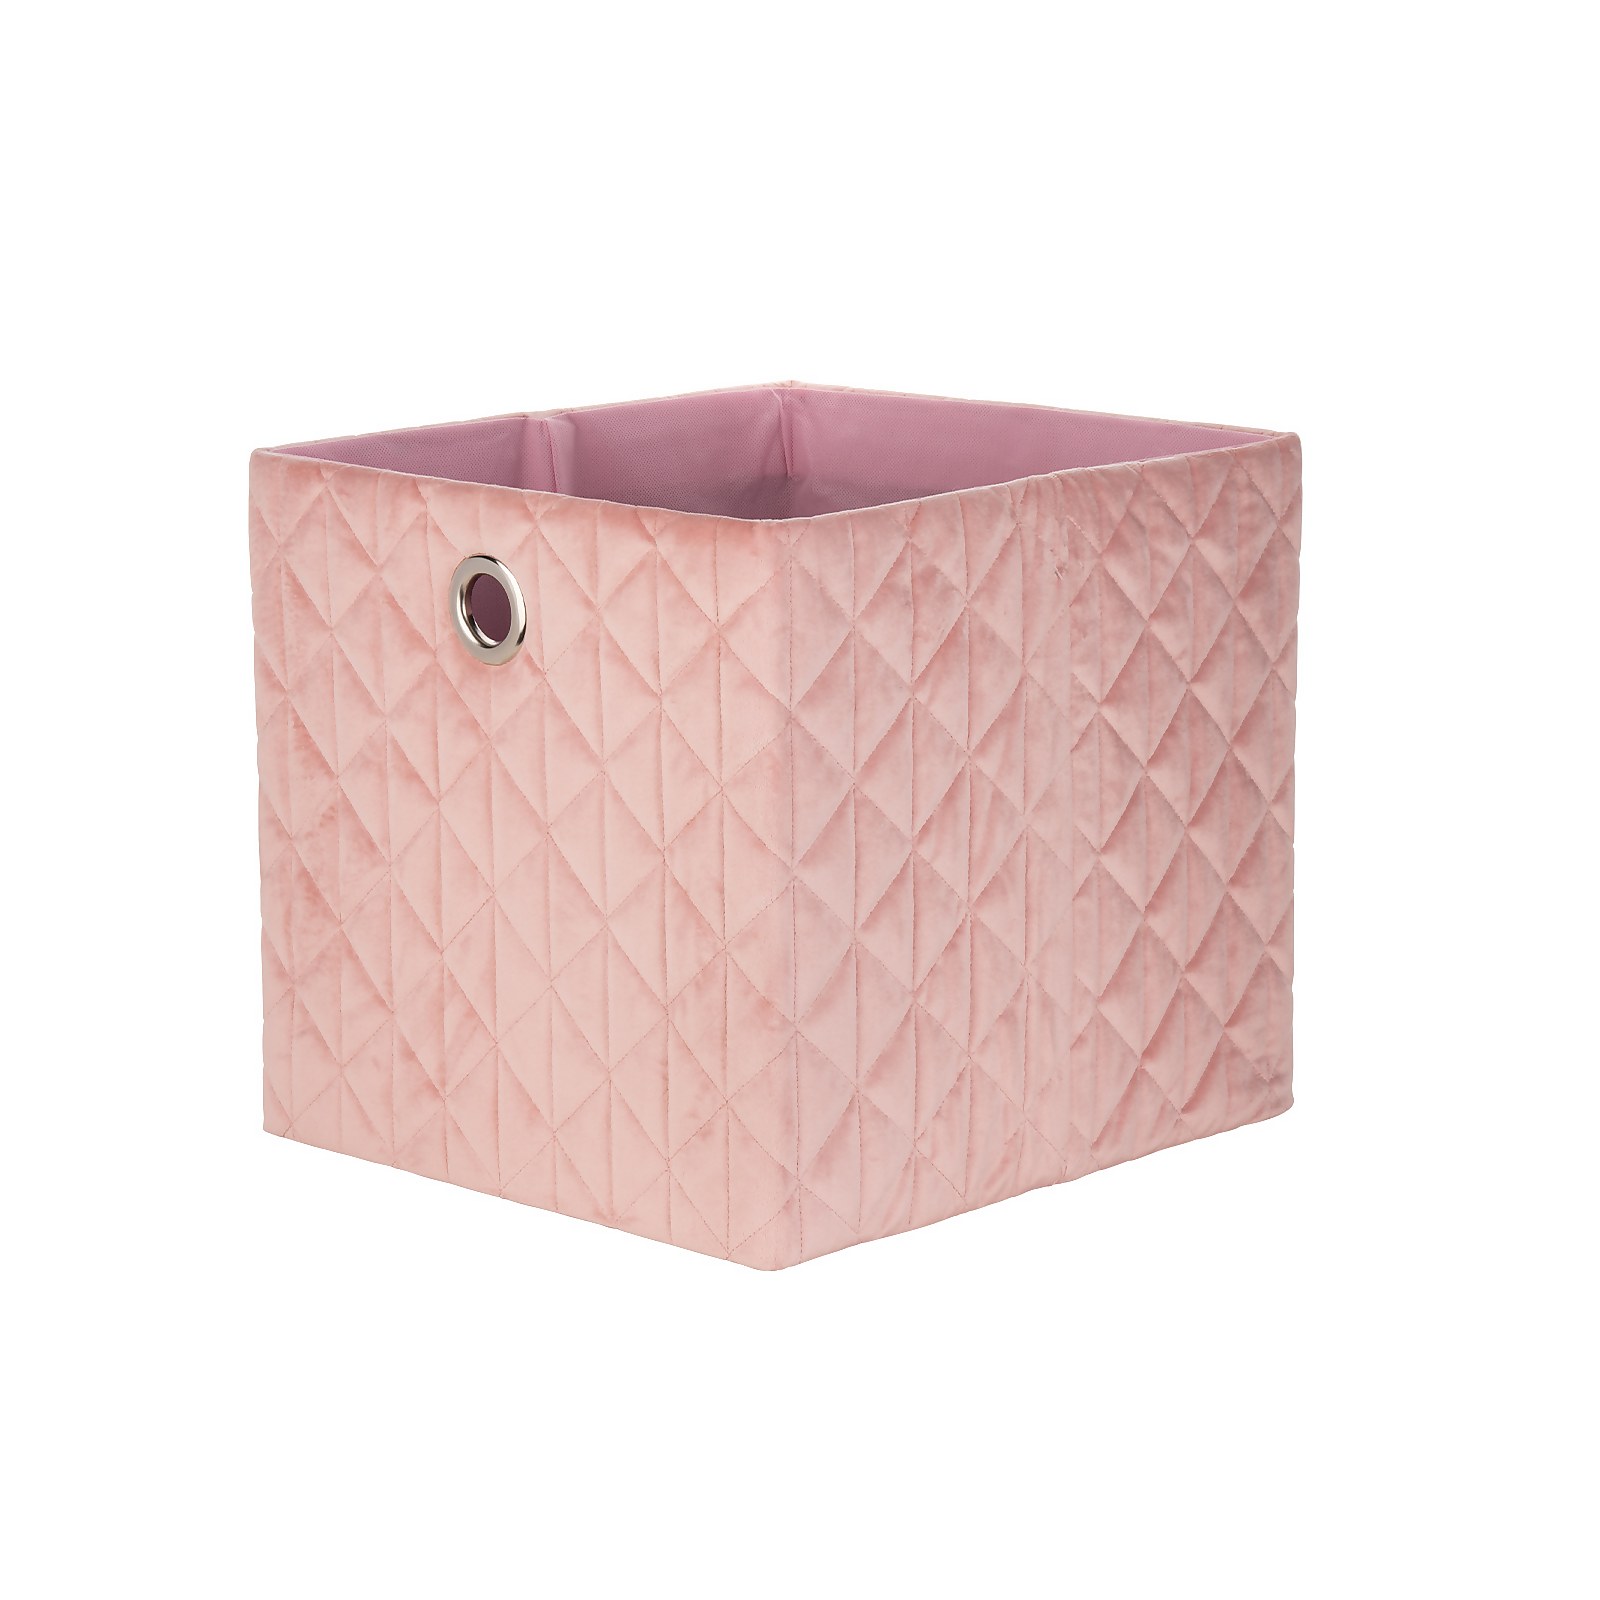 Photo of Living Elements Clever Cube Quilted Velvet Insert - Blush Pink